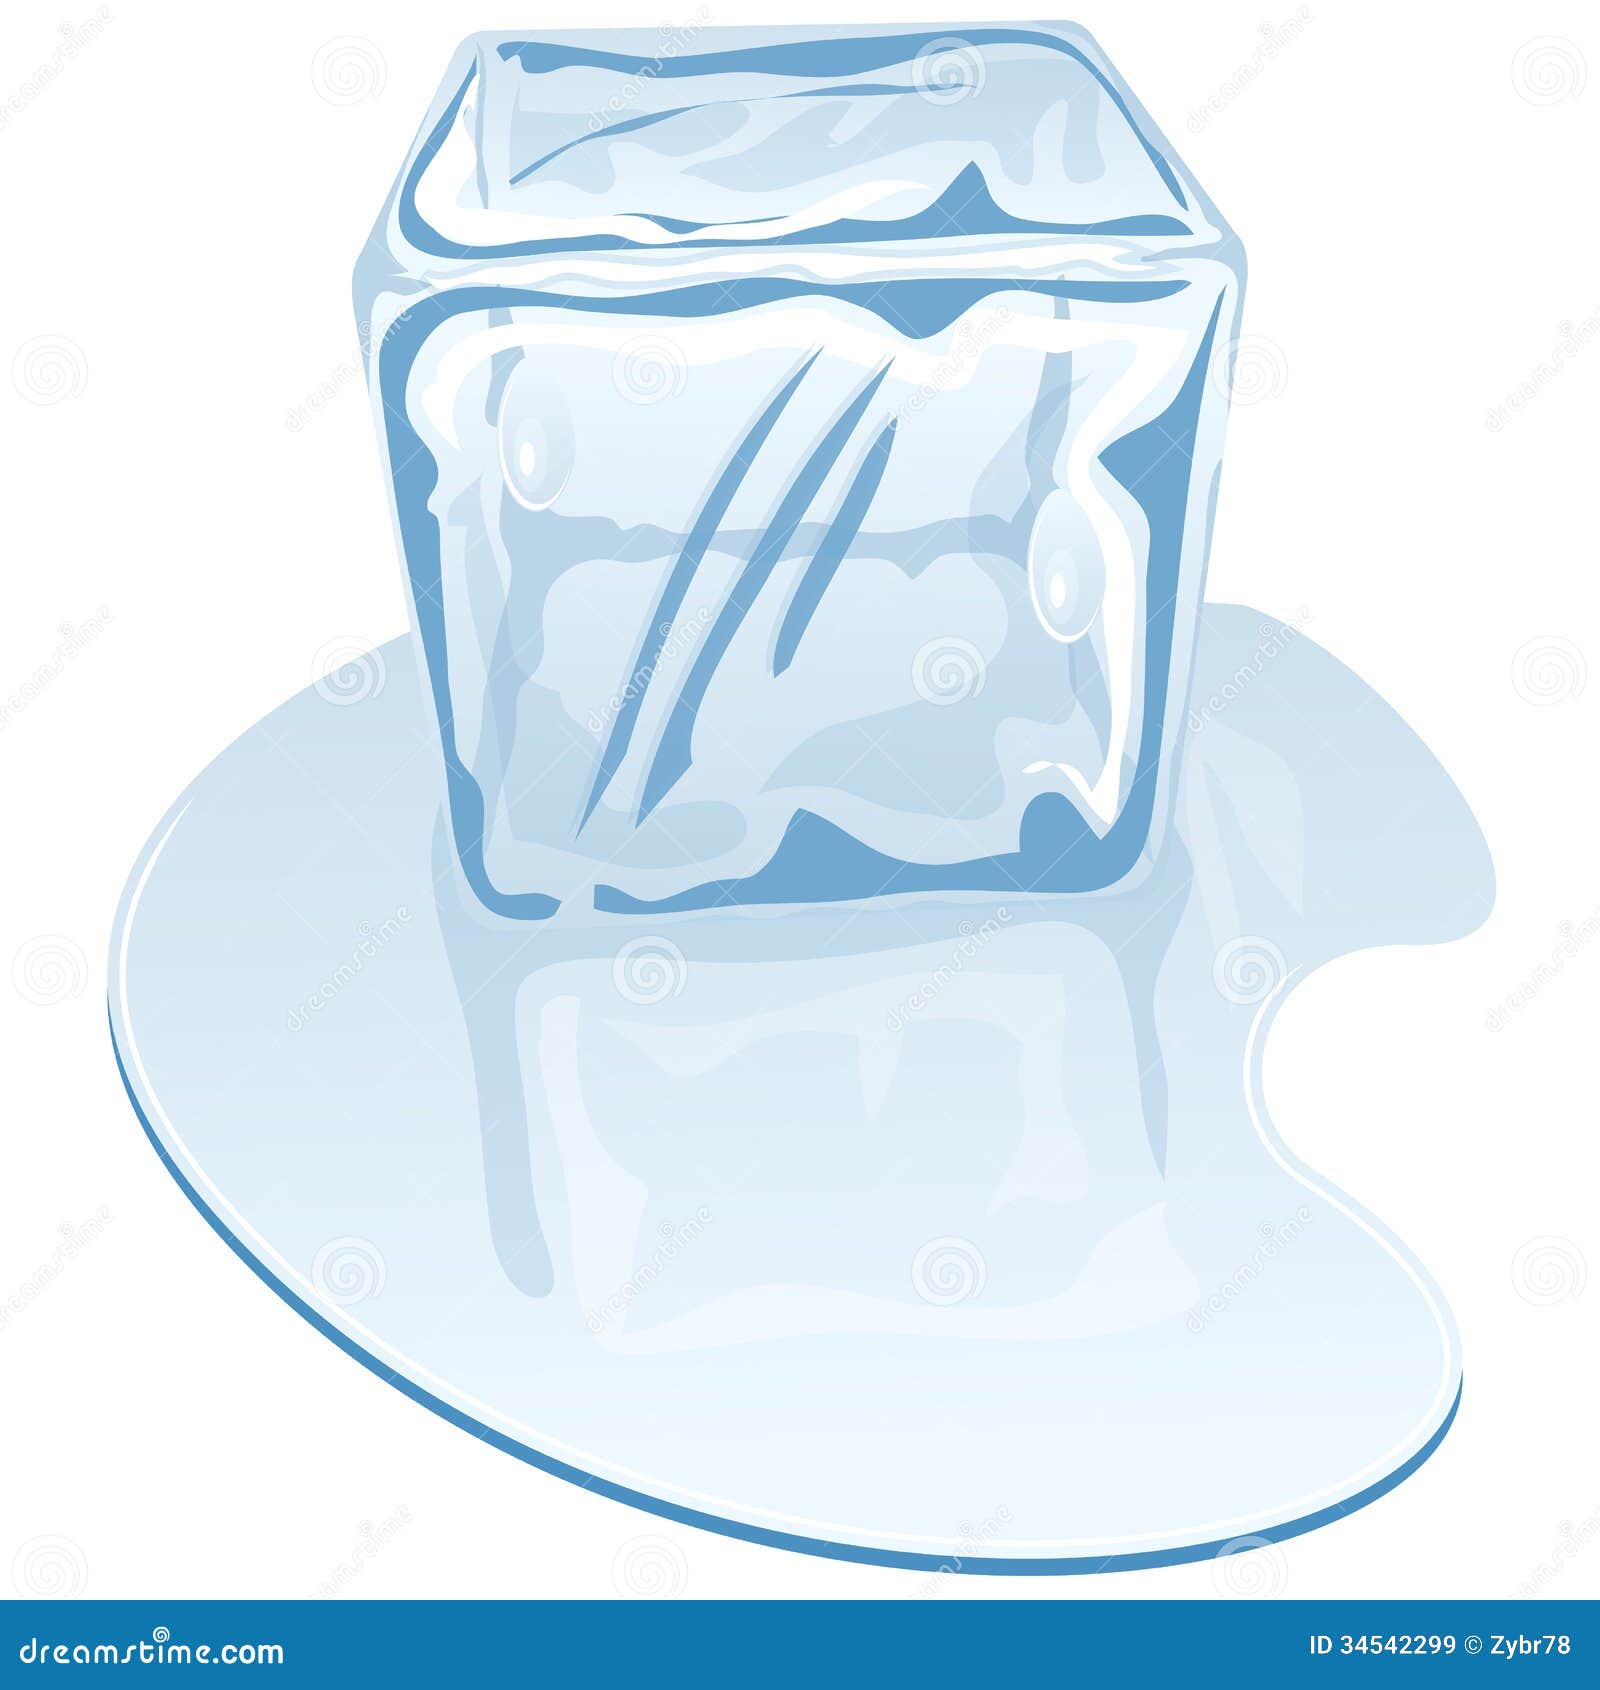 clipart ice cubes - photo #47